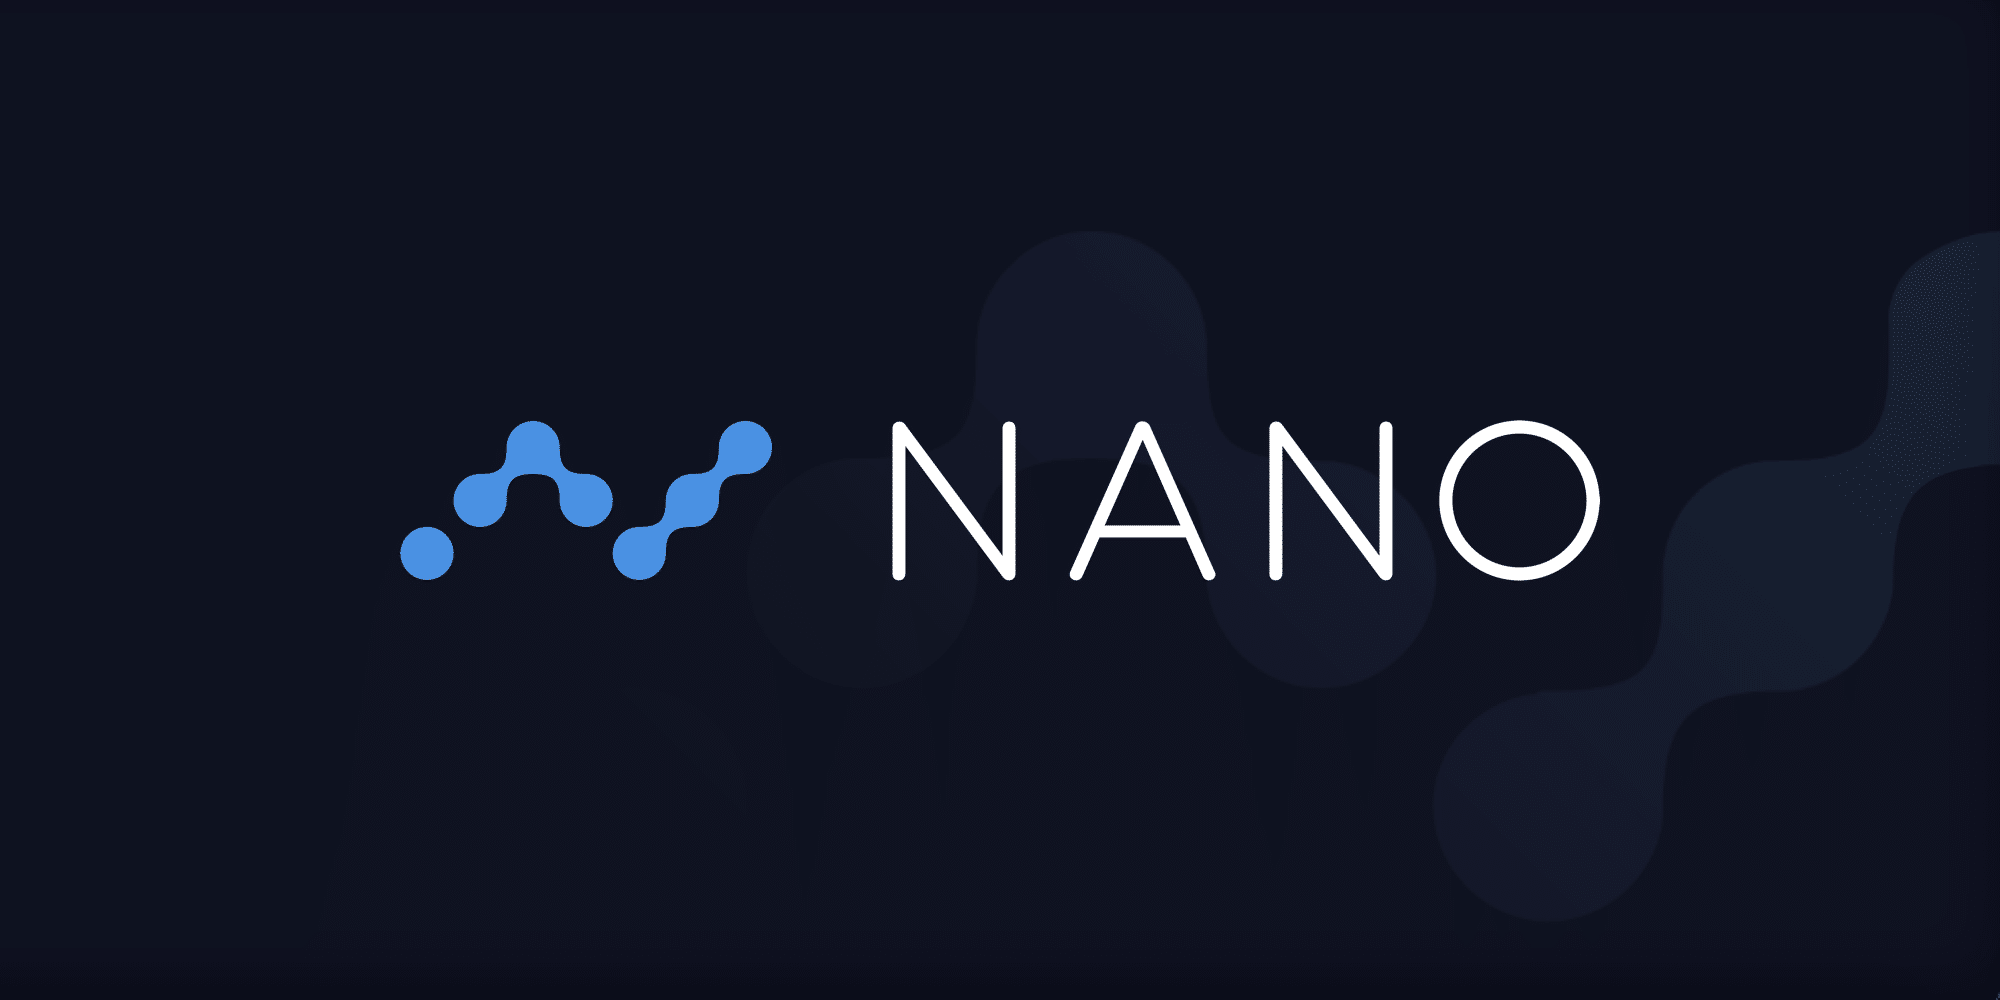 Nano price live today (04 Mar ) - Why Nano price is falling by % today | ET Markets